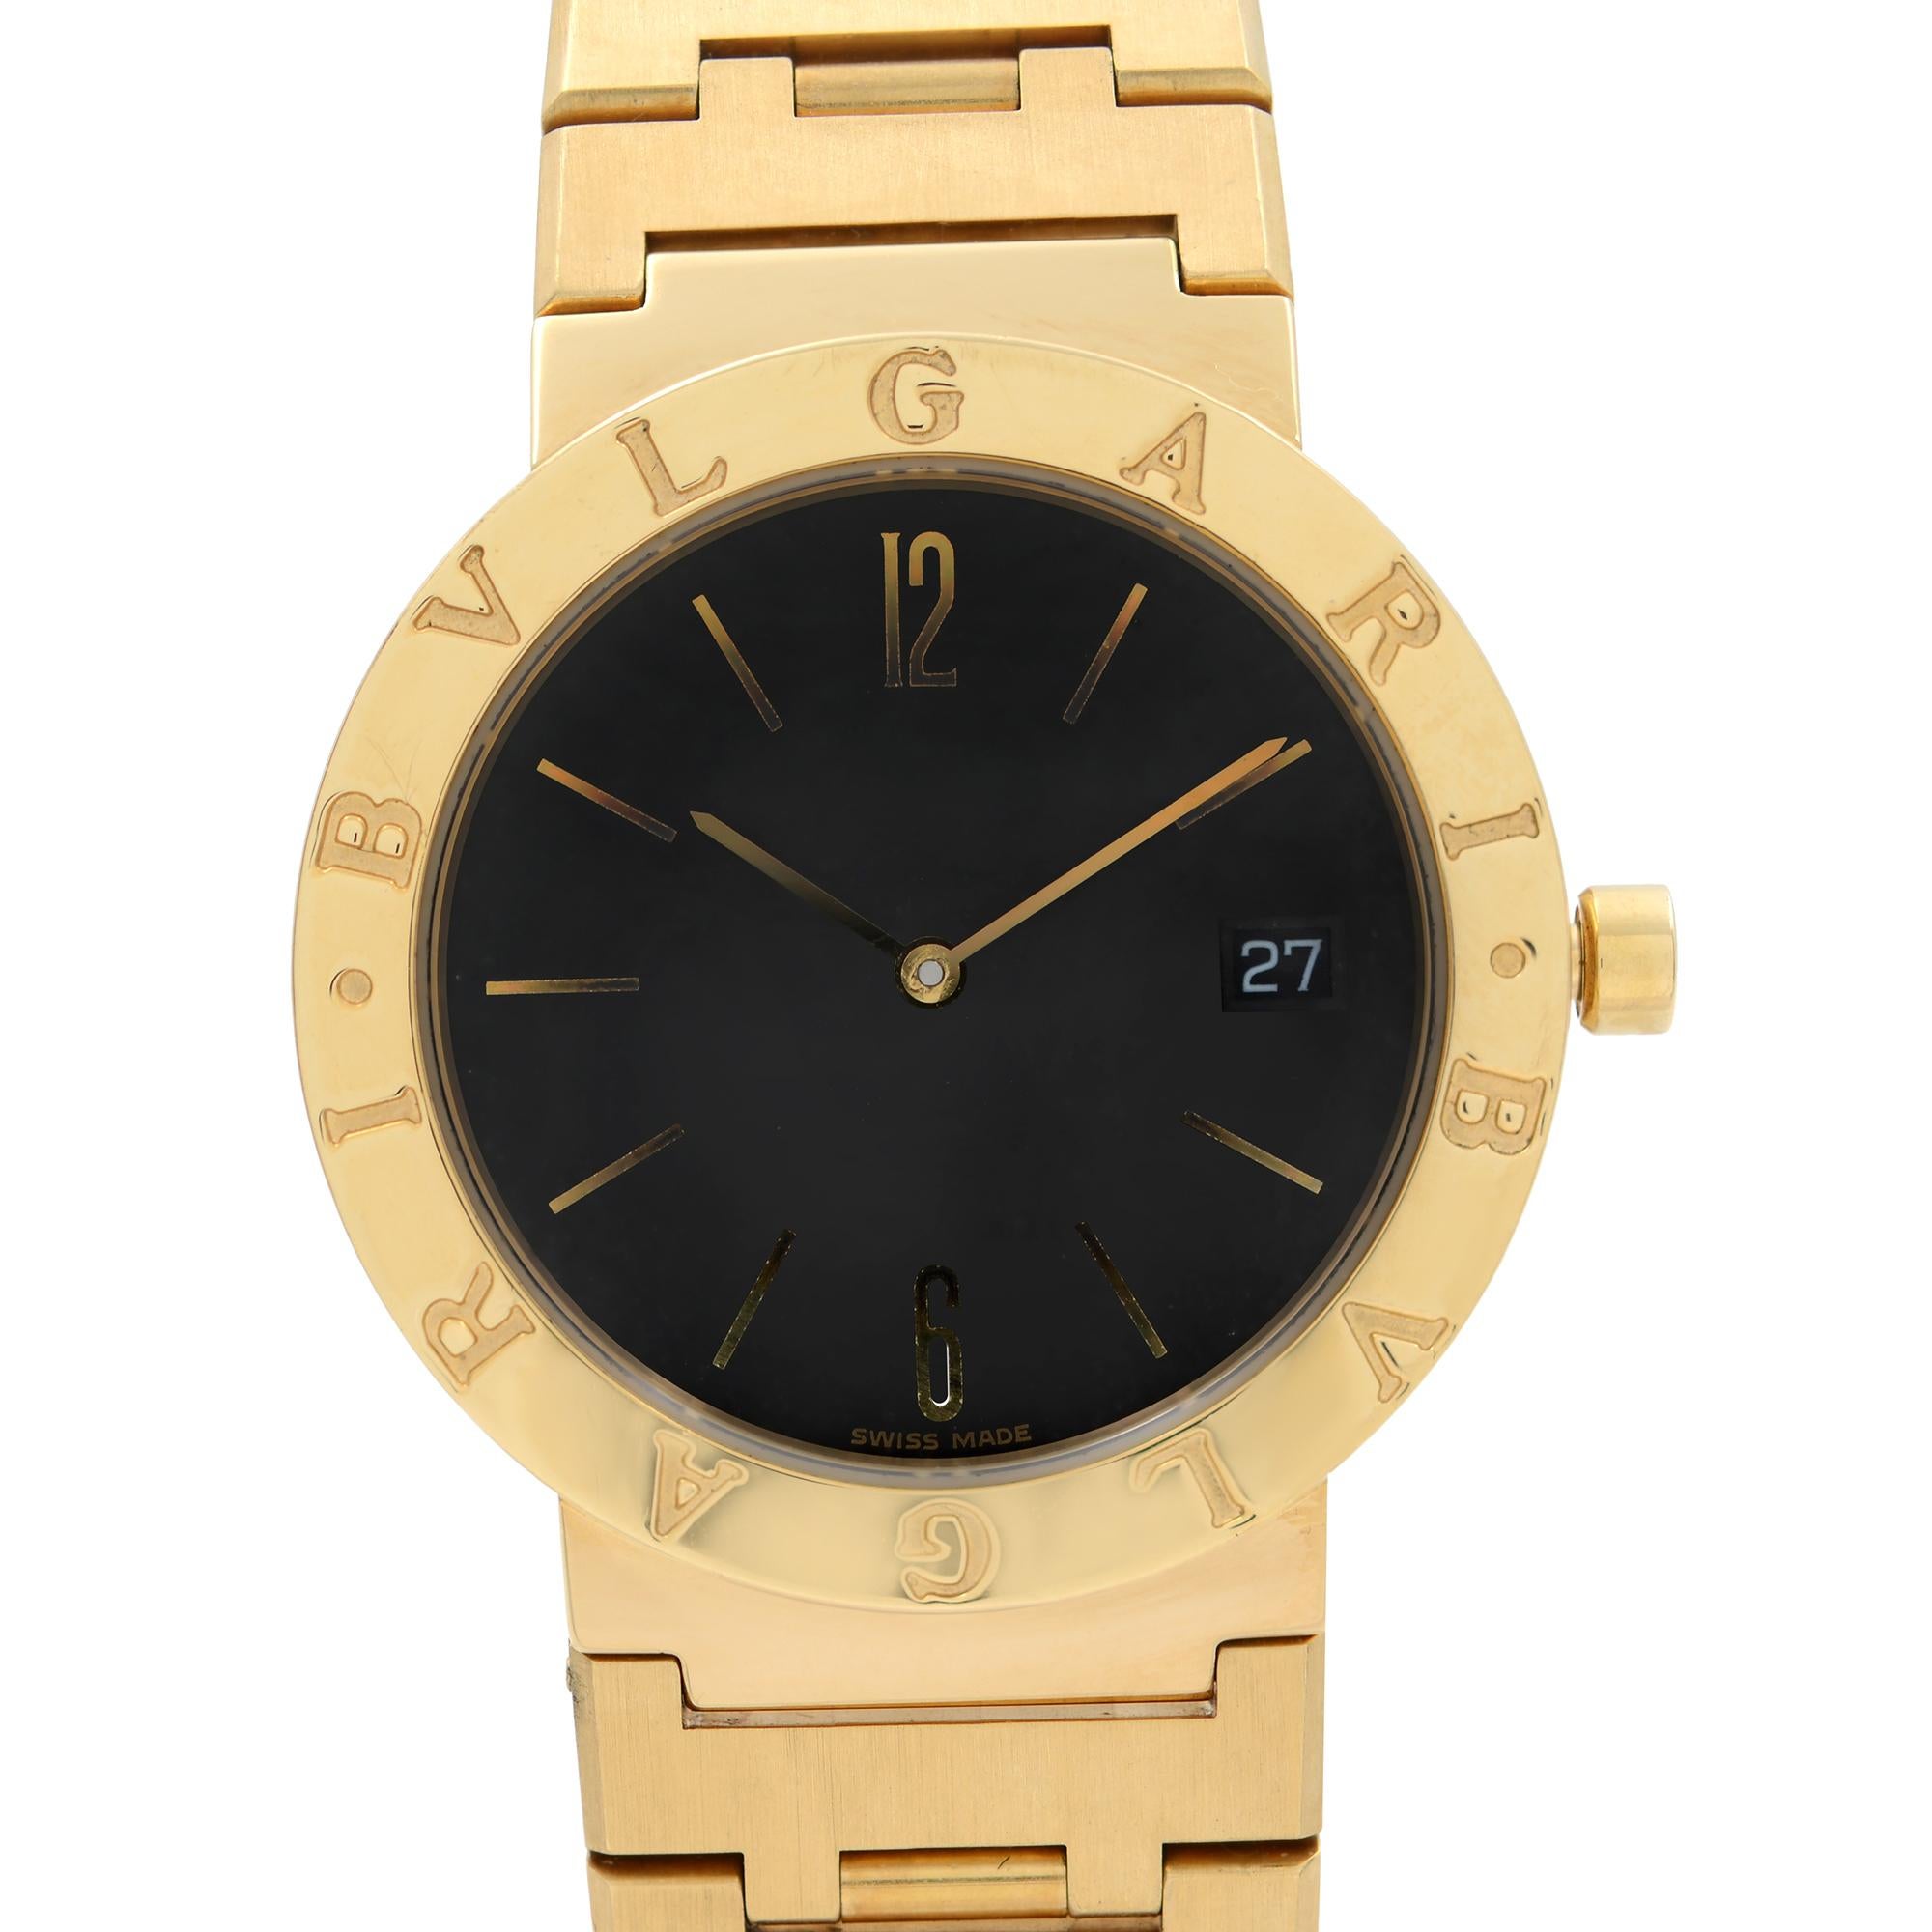 Pre Owned Bvlgari Diagono 33mm 18k Yellow Gold Black Dial Unisex Quartz Watch BB.39.GG. This Beautiful Timepiece is Powered by Quartz (Battery) Movement And Features: Round 18k Yellow Gold Case & Bracelet, Fixed 18k Gold 